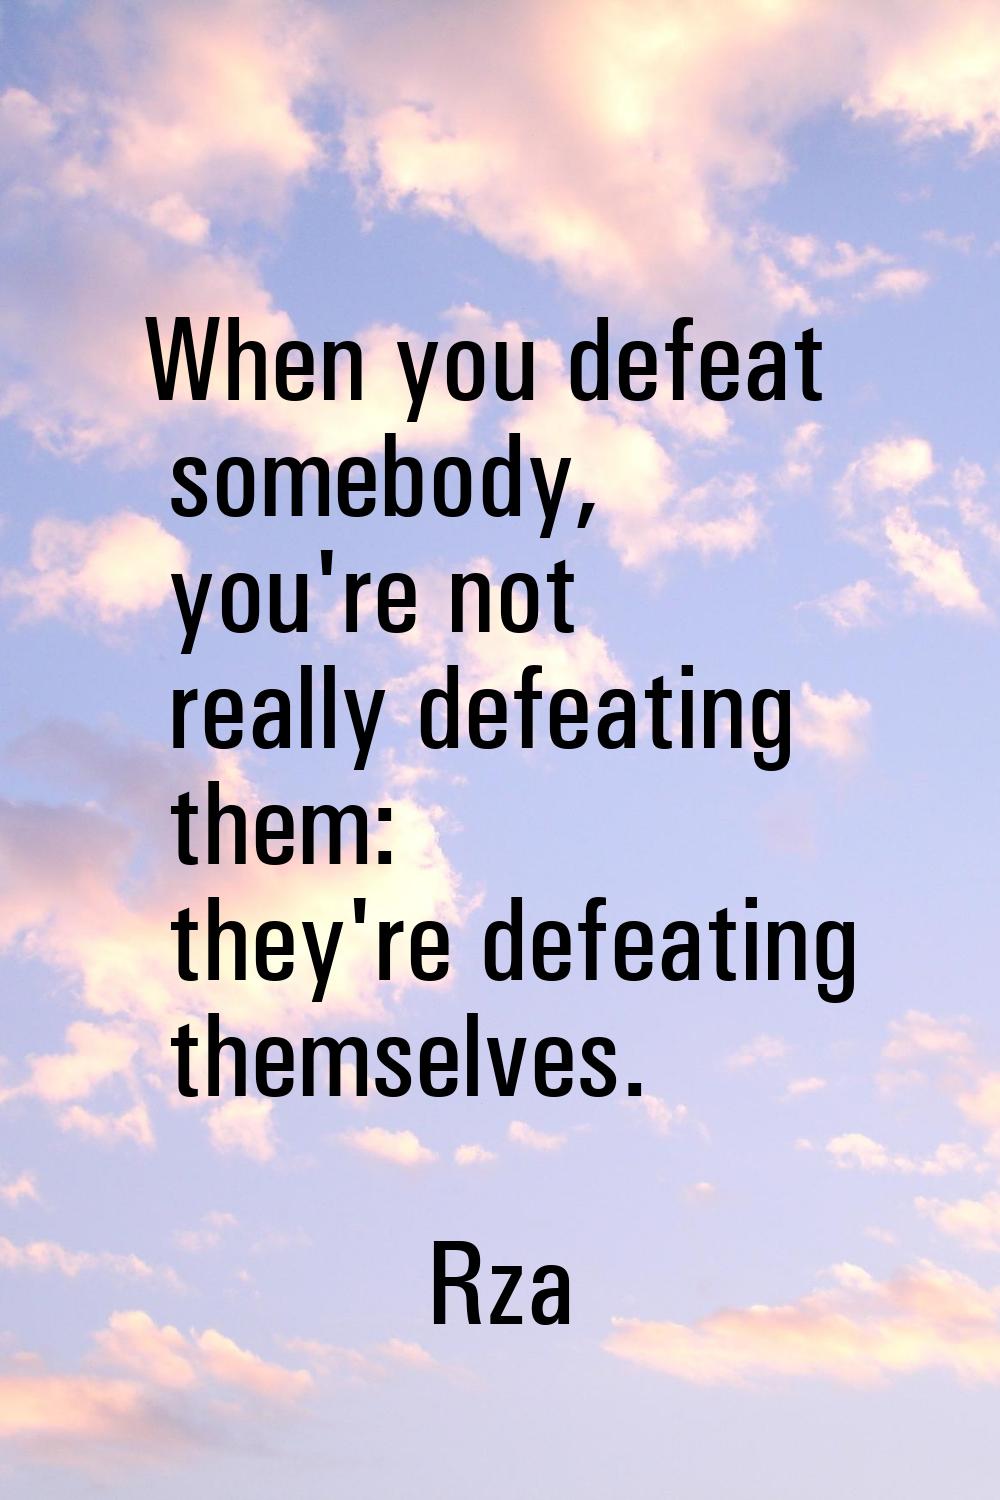 When you defeat somebody, you're not really defeating them: they're defeating themselves.